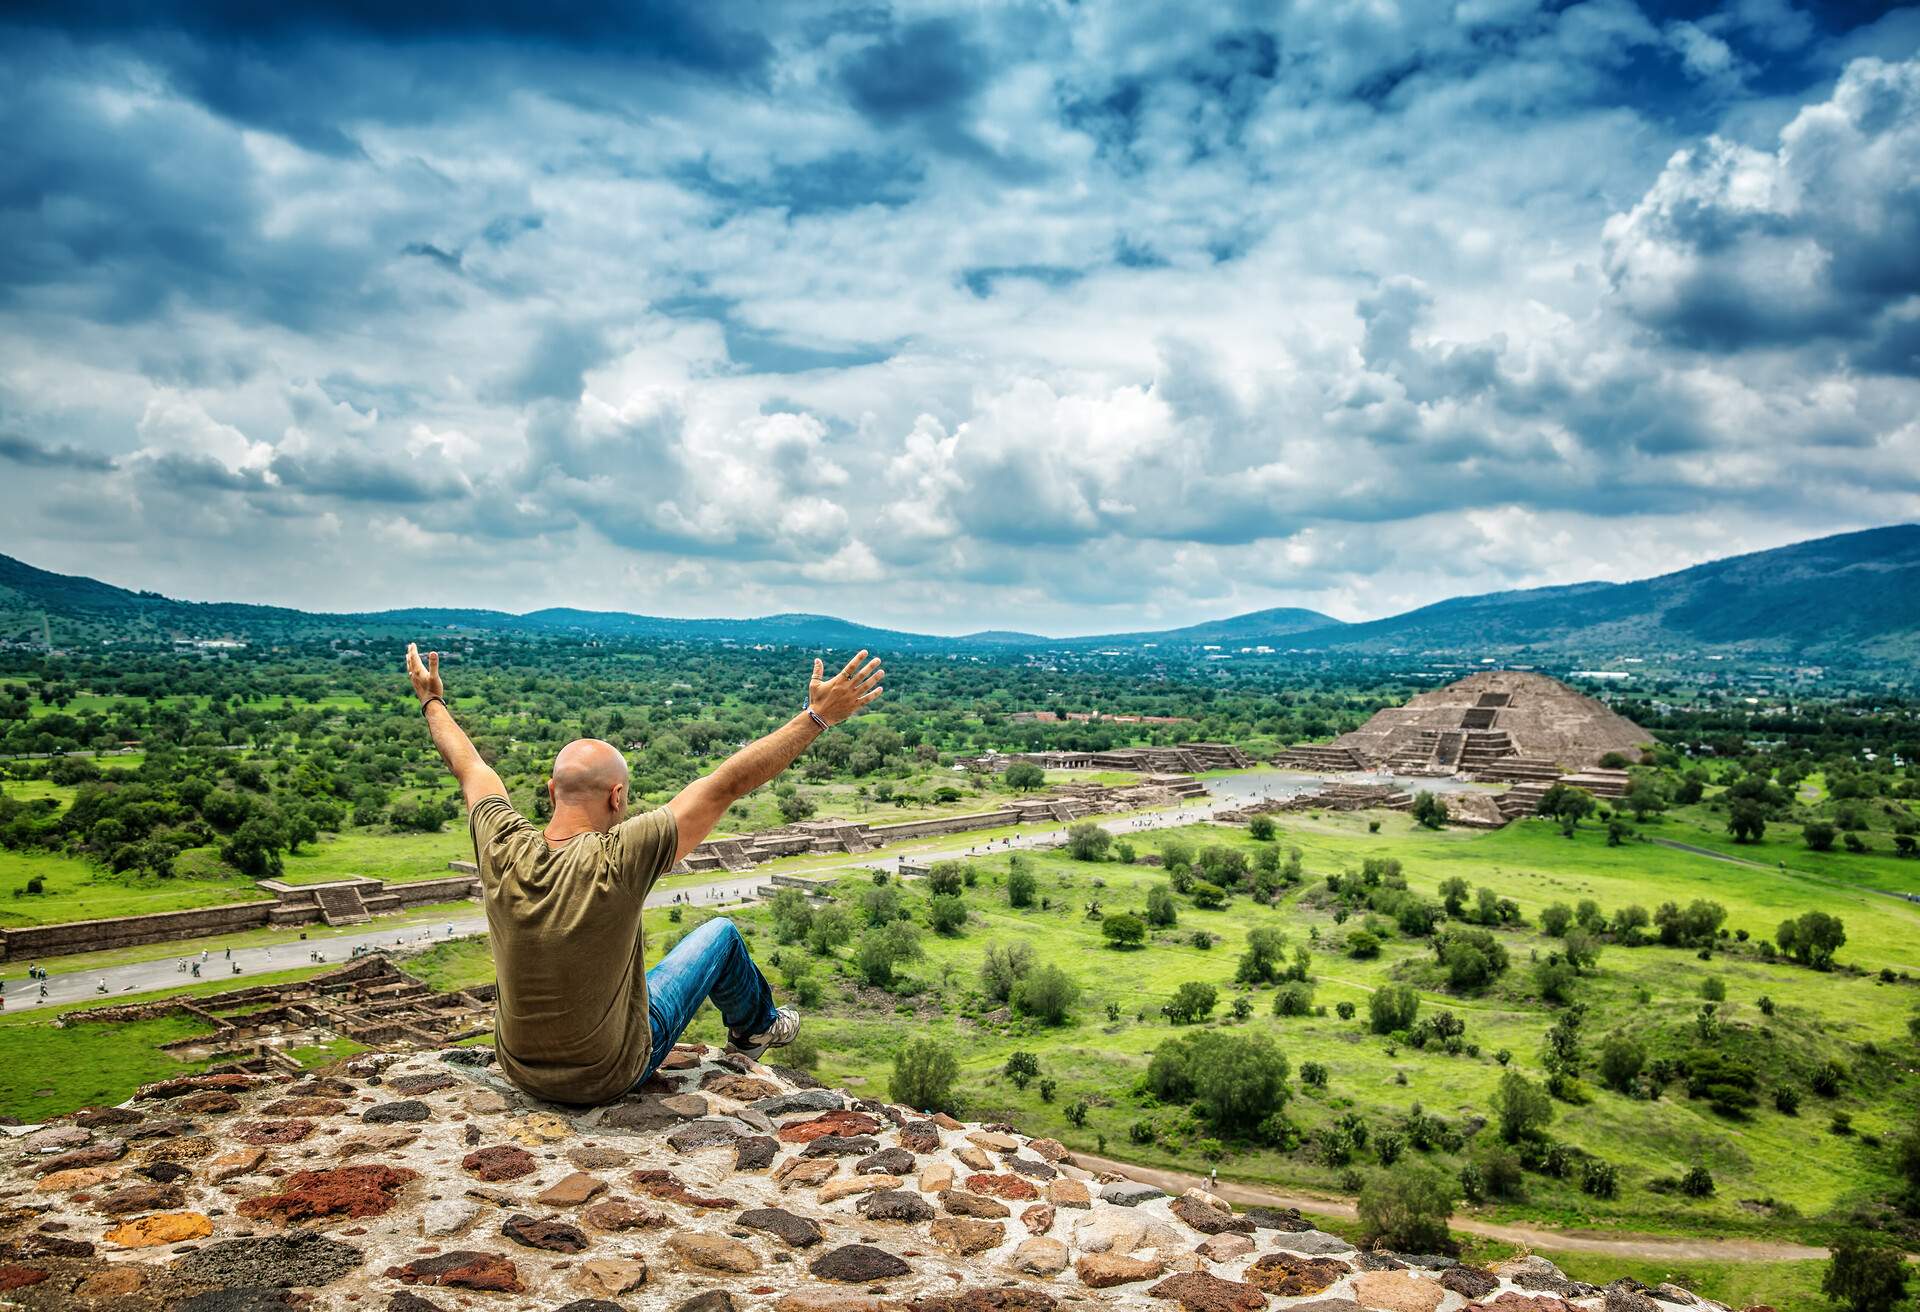 DEST_MEXICO_TEOTIHUACAN_GettyImages